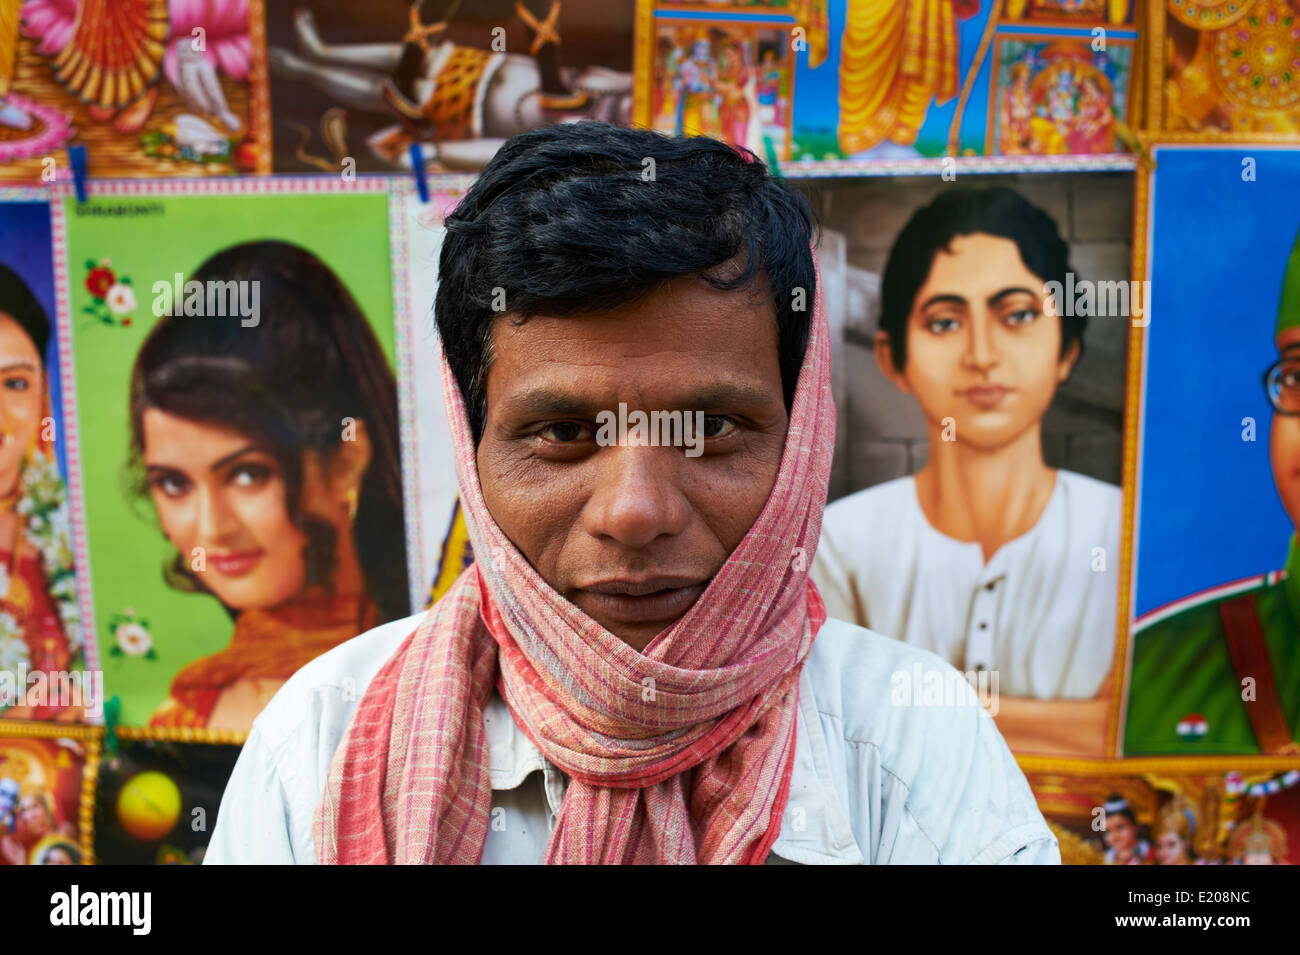 L'Inde, le Bengale occidental, Calcutta, Calcutta, rickshaw man on the street Banque D'Images